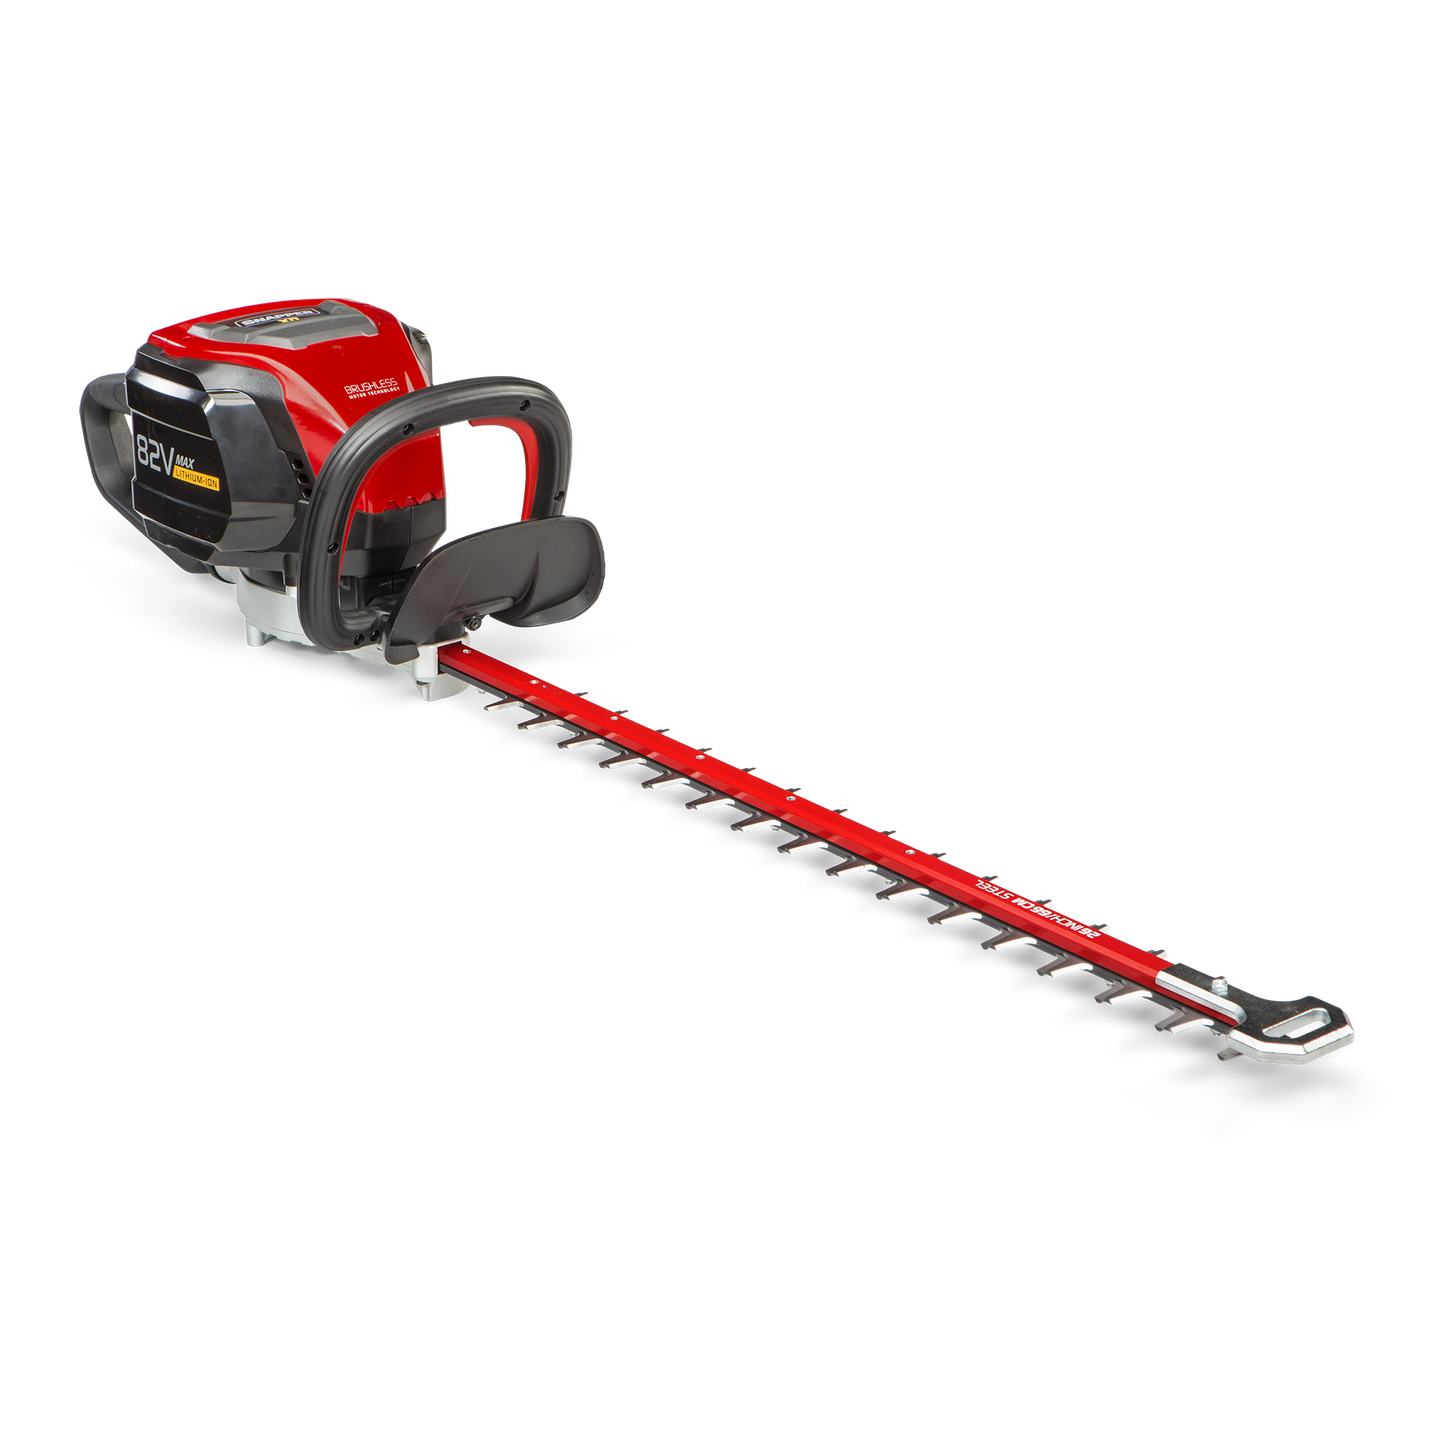 SXDHT82 - Hedge Trimmer